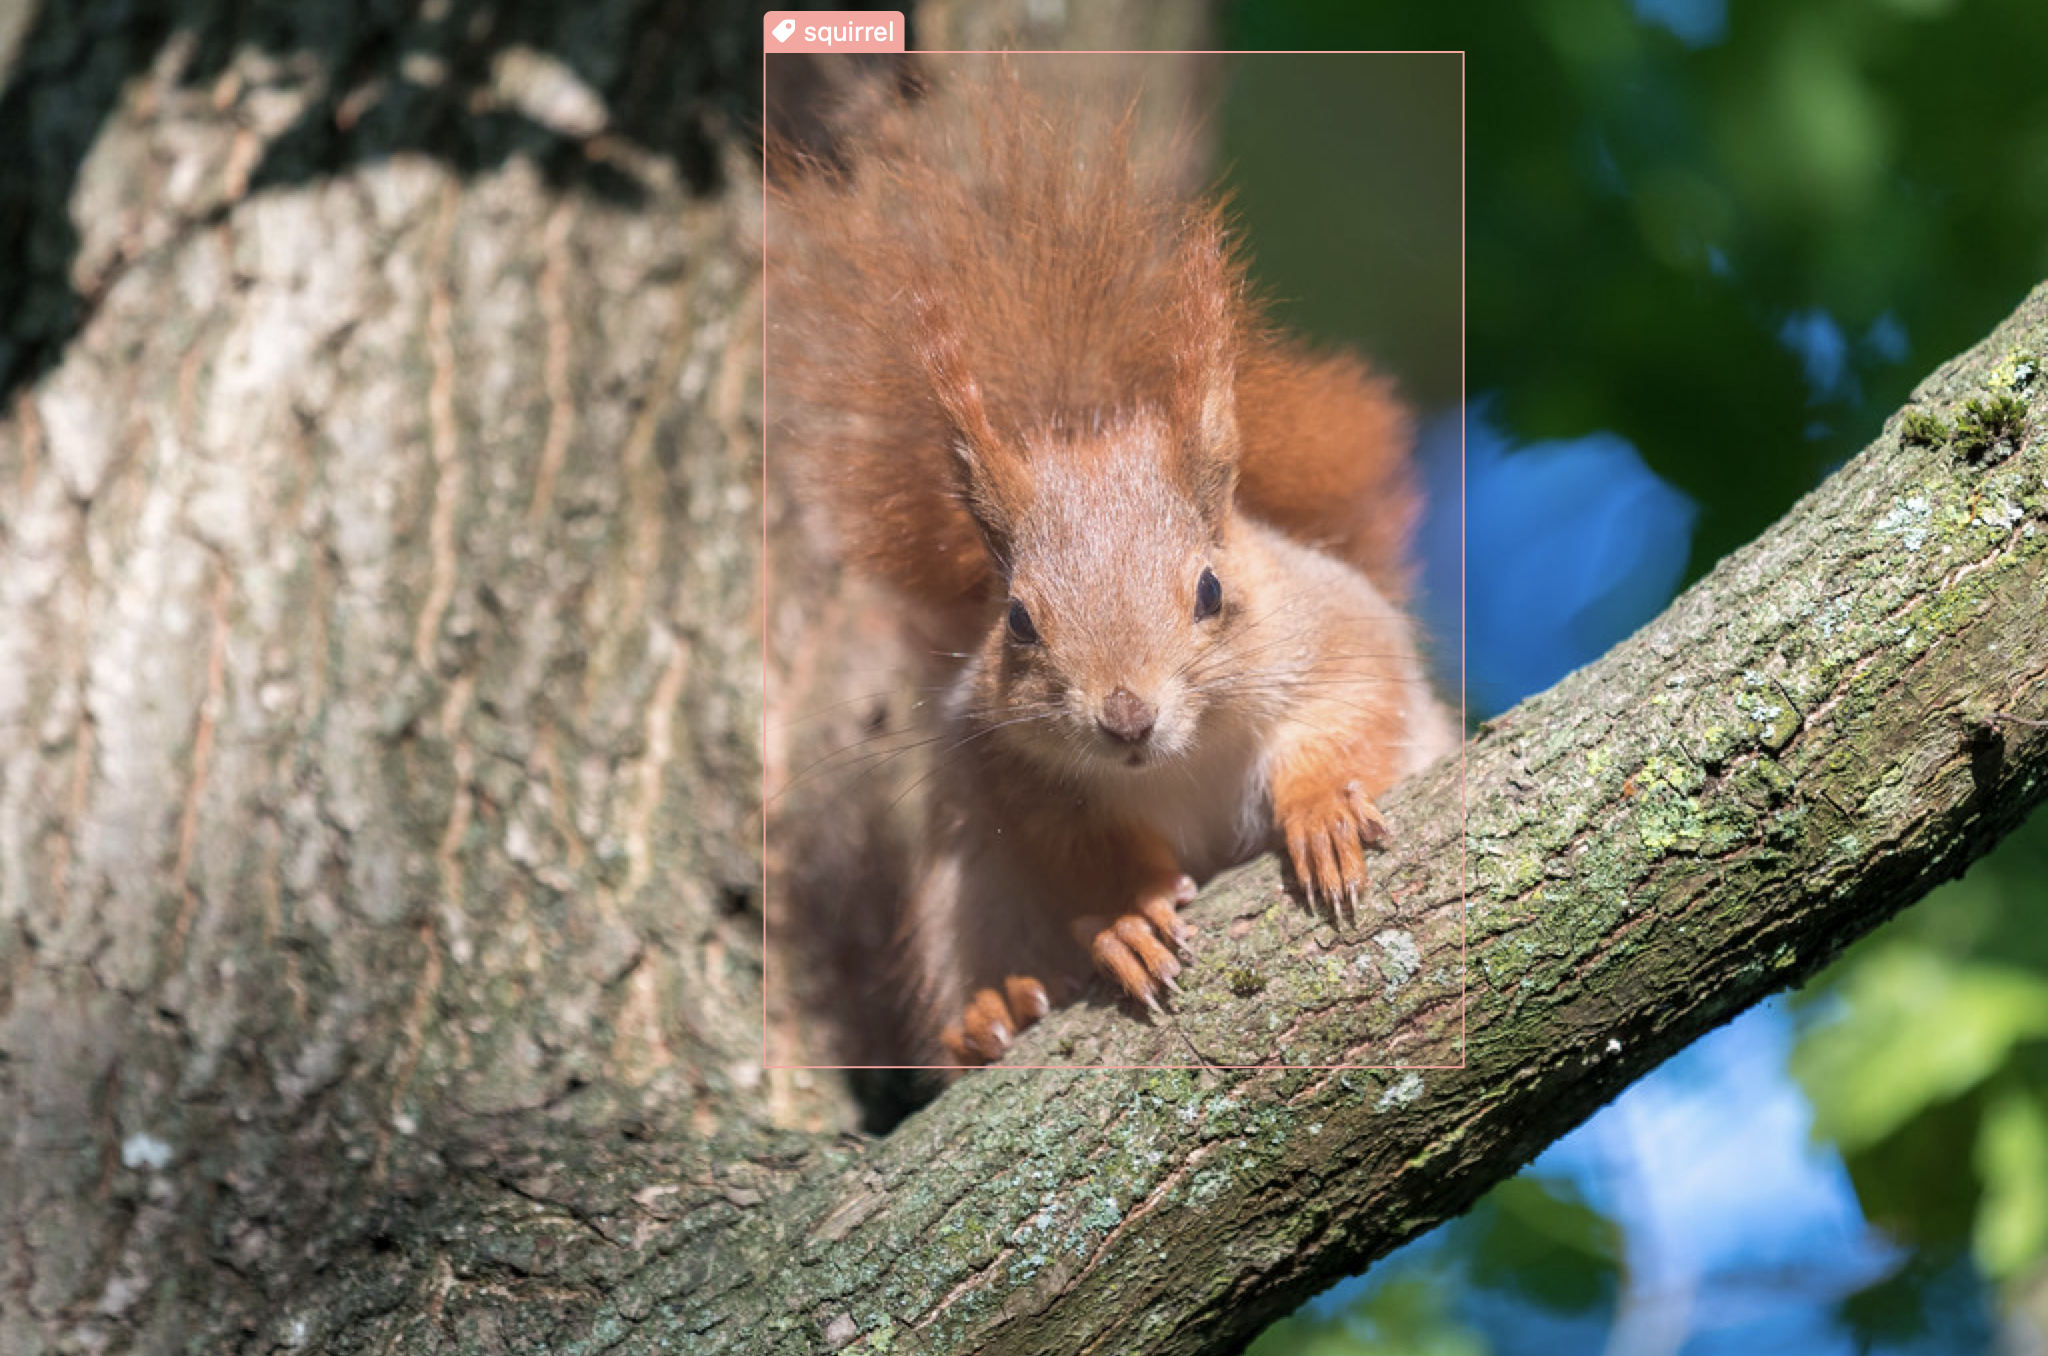 Same image showing a squirrel in a tree with the correct bounding box